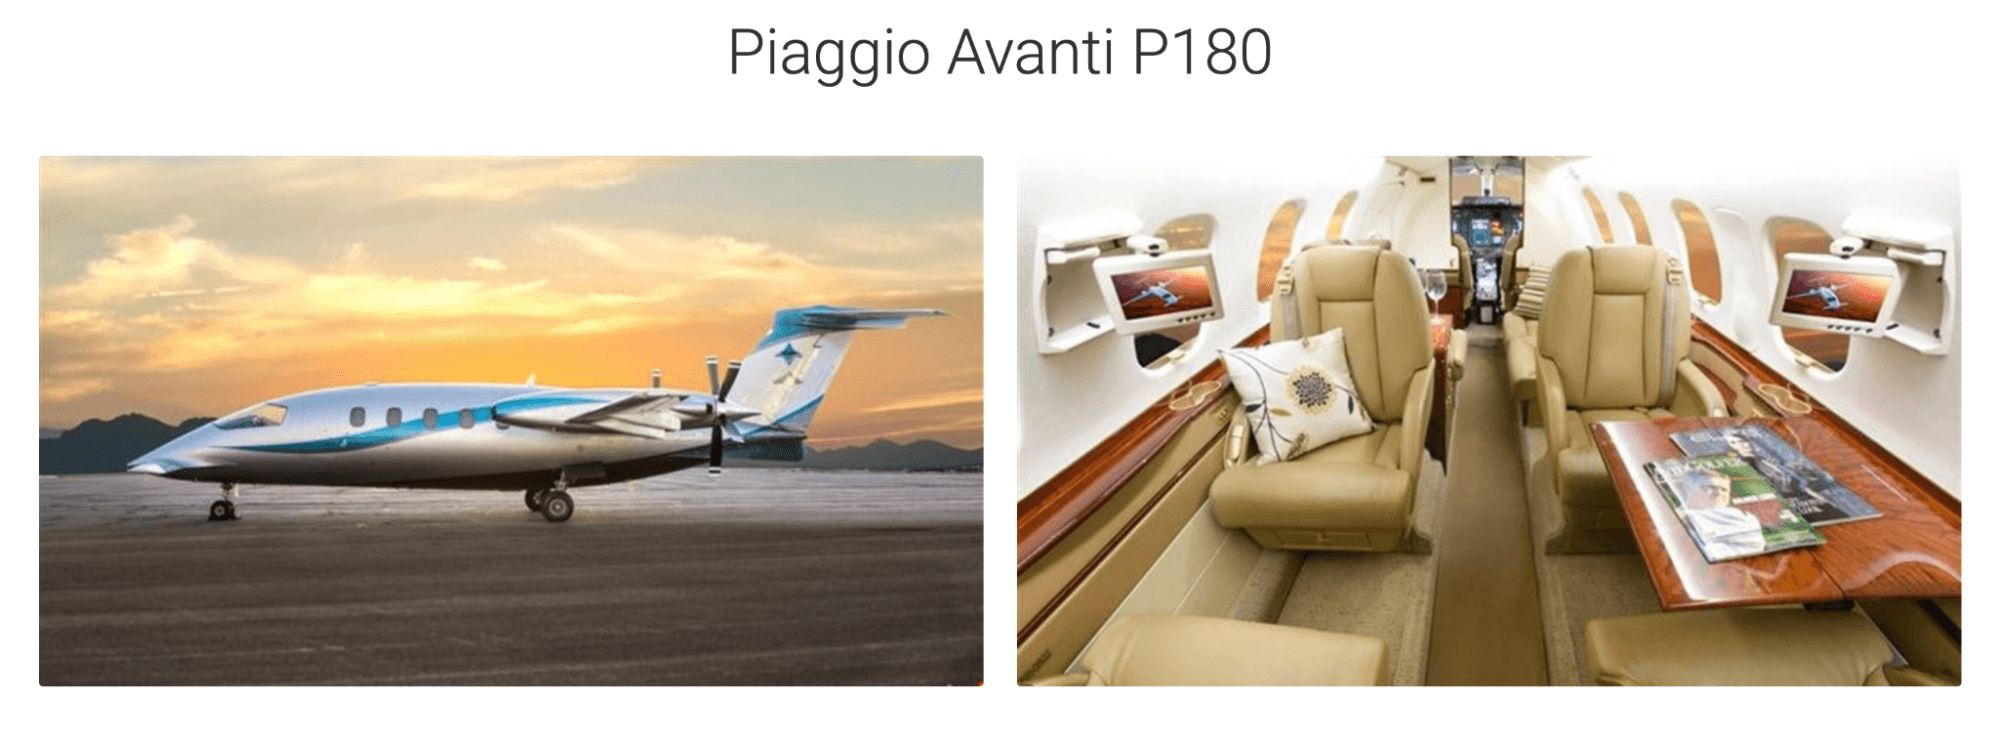 An exterior and interior picture of the turboprop jet Piaggio Avanti P180.